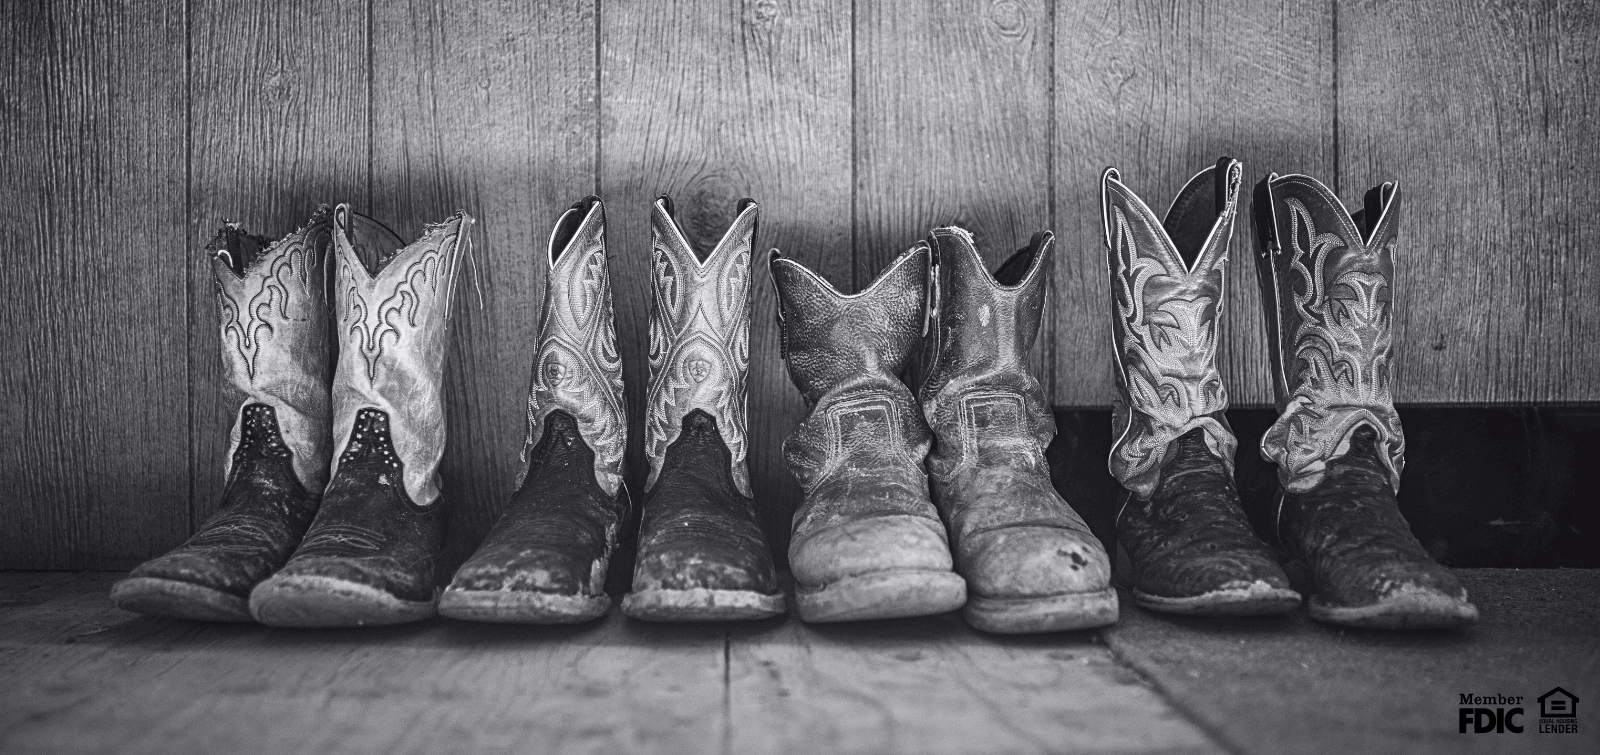 four pairs of cowboy and cowgirl boots lined up against the wall.